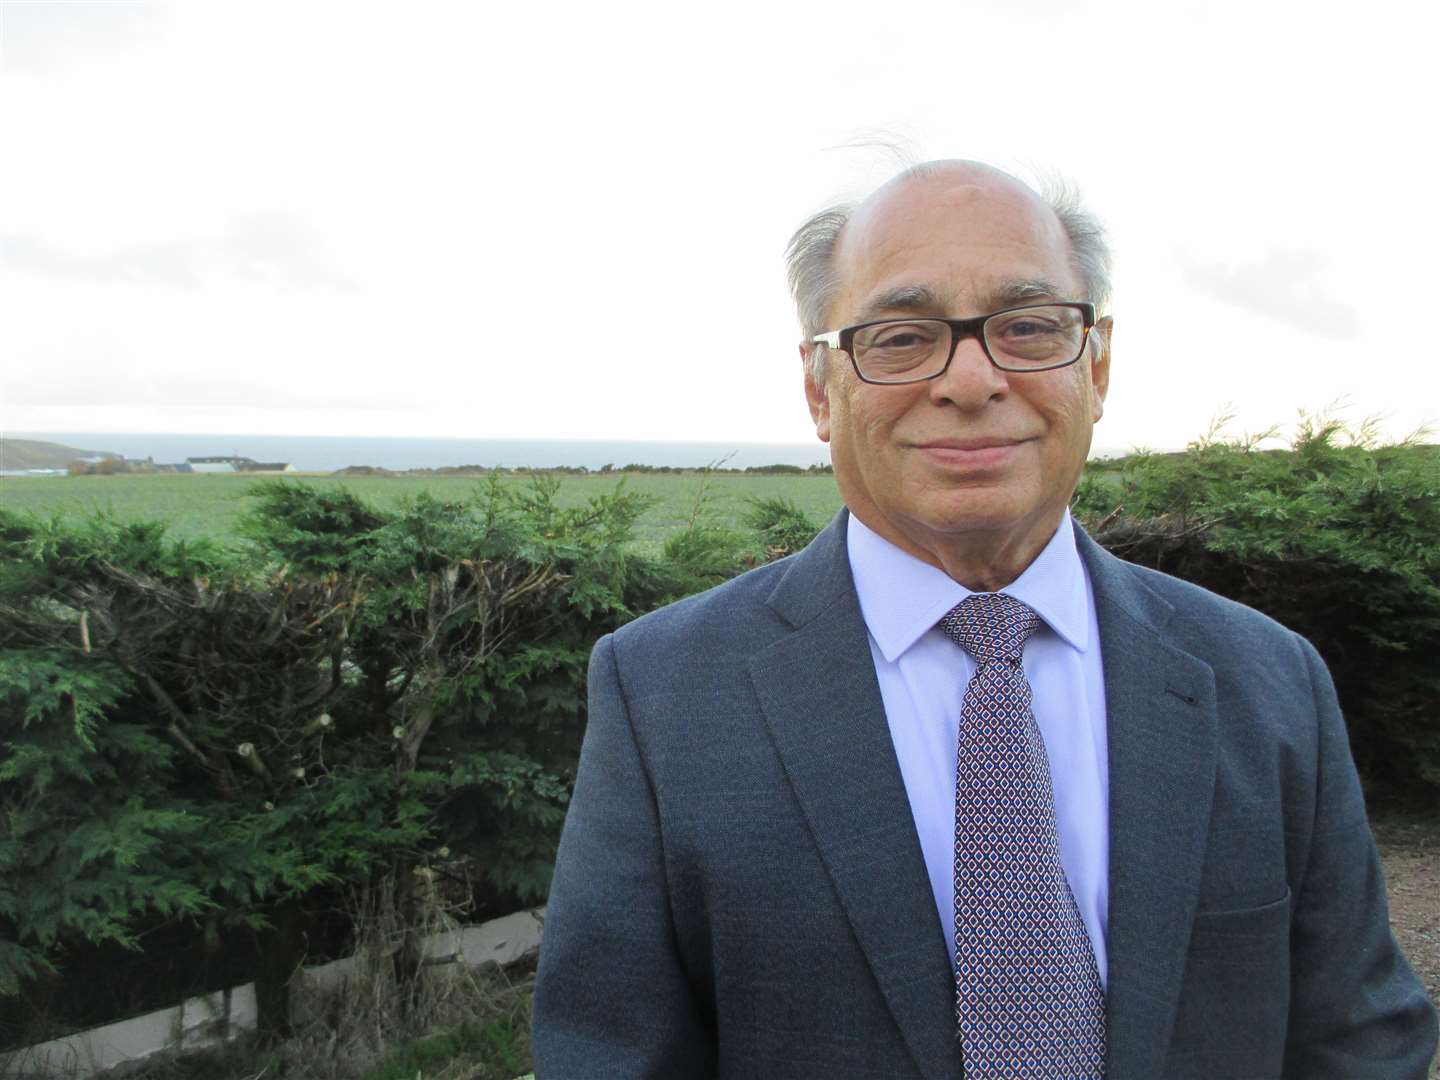 Vinay Ruparelia has been awarded an MBE.